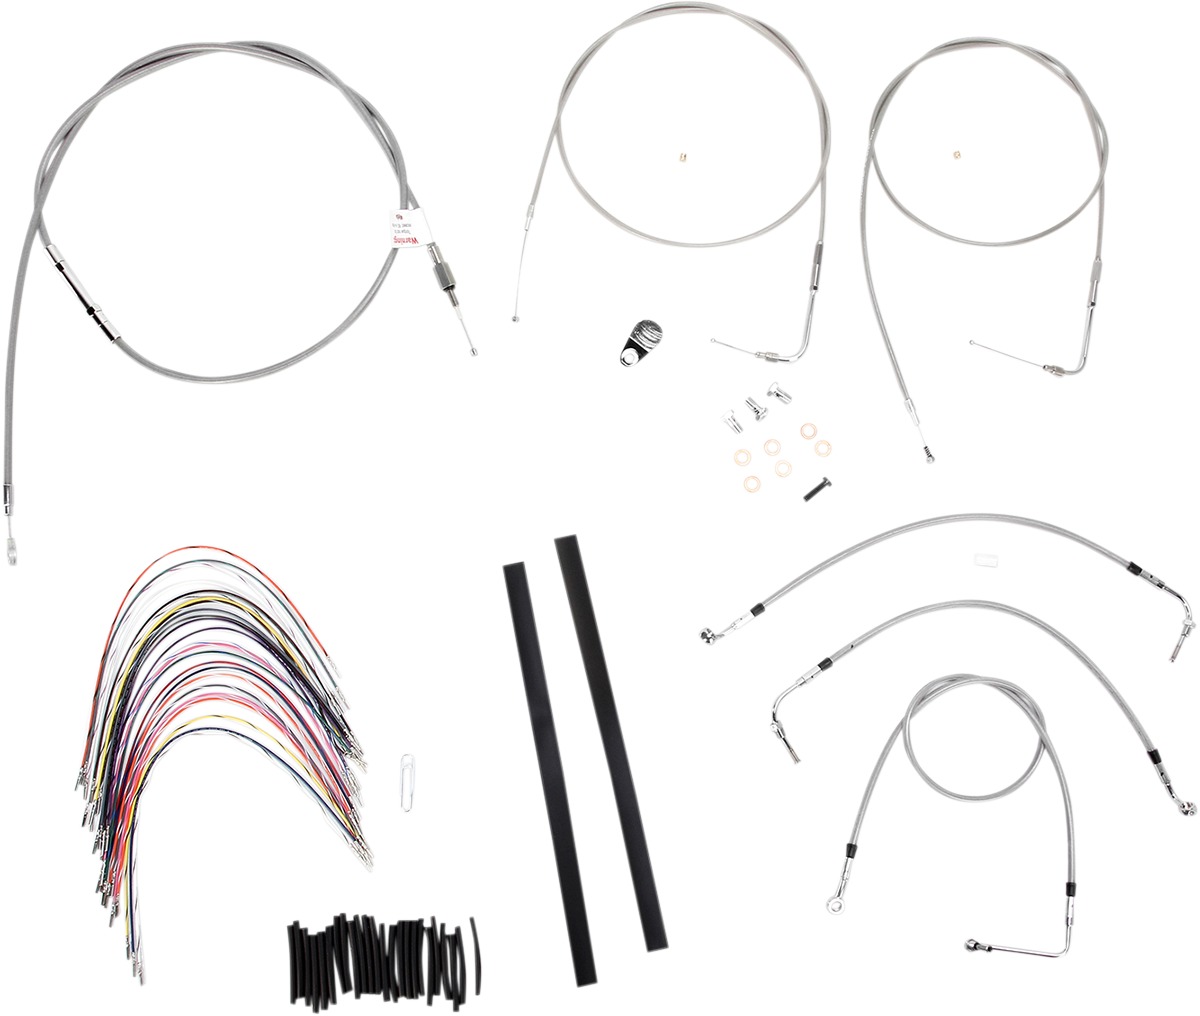 Extended Braided S.S. Control Cable Kit for Baggers - 16" tall bars - Click Image to Close